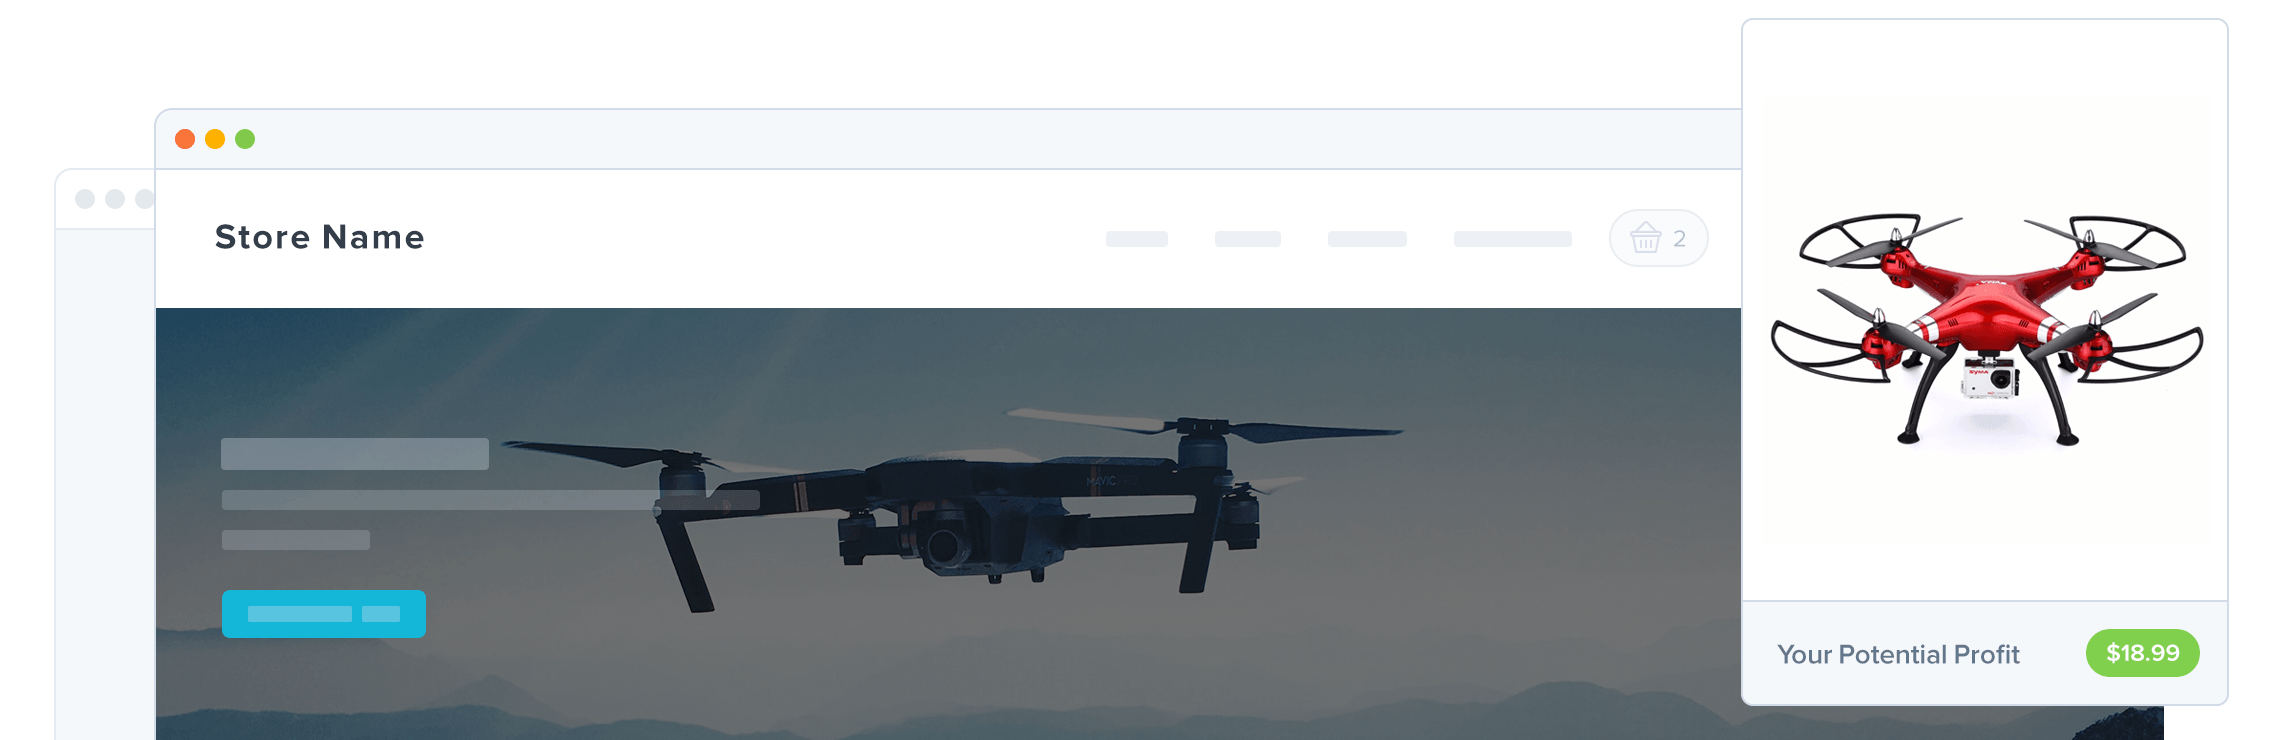 Dropshipping drones